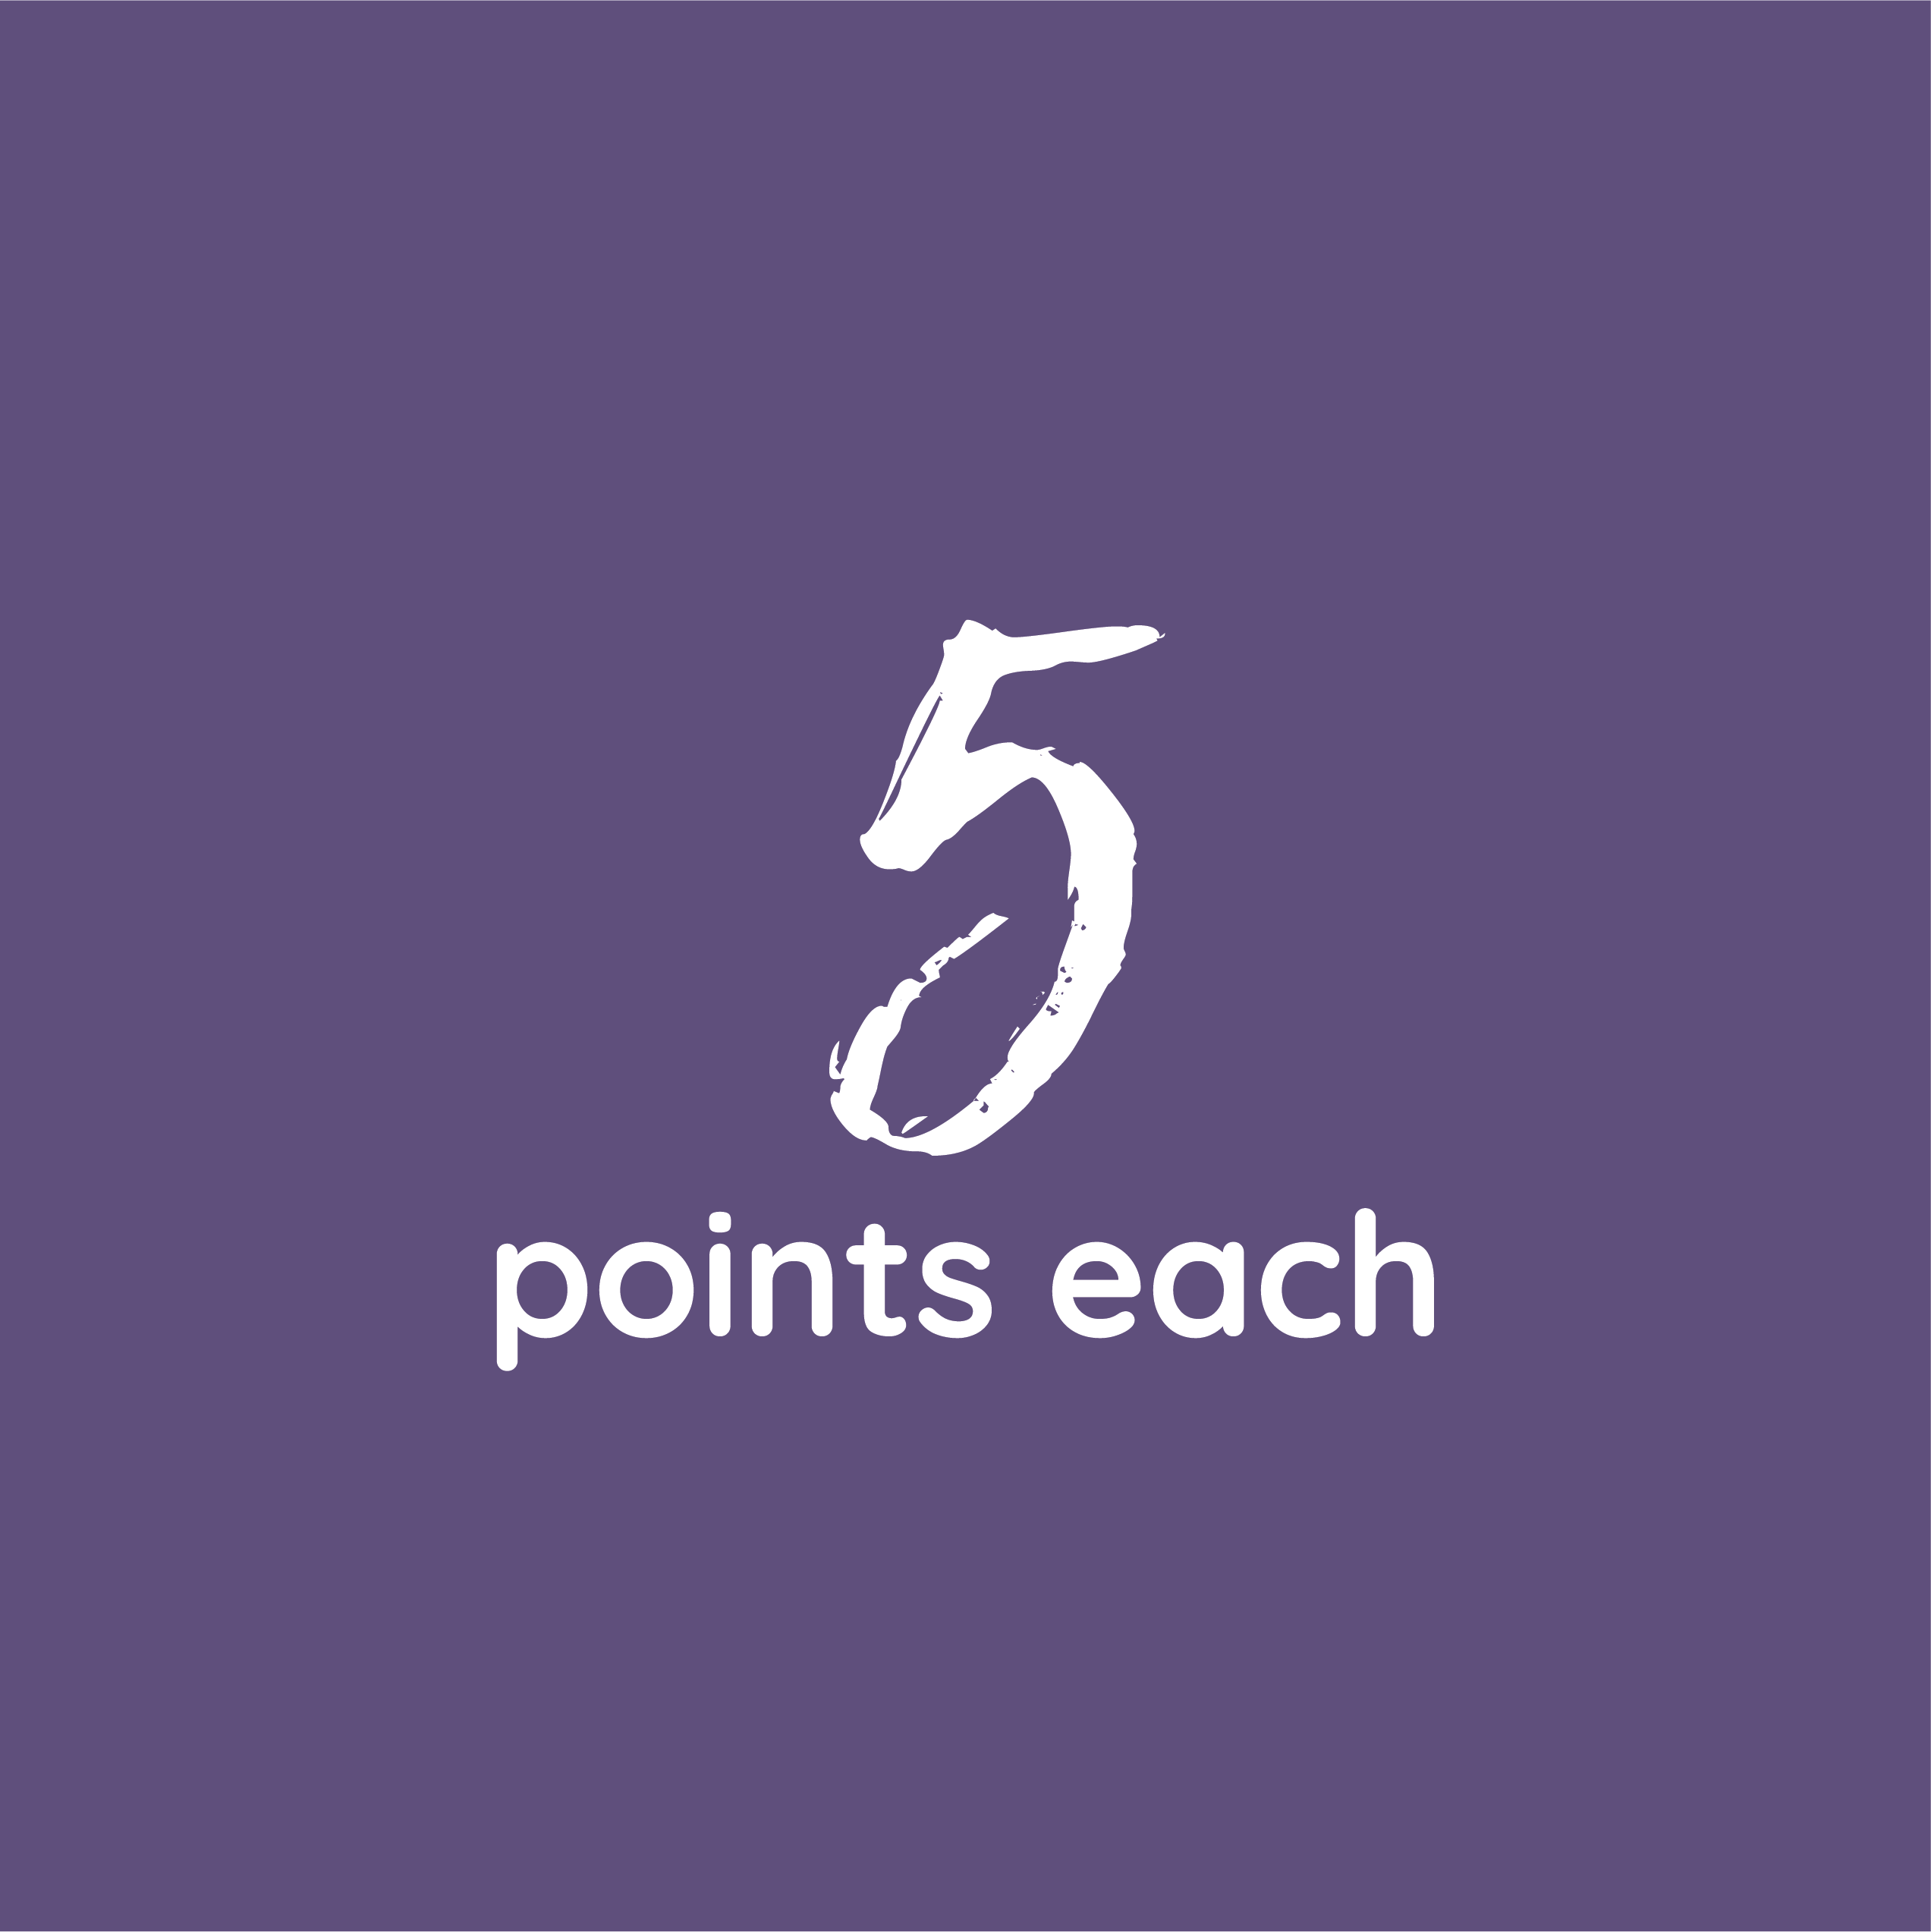 5 points each